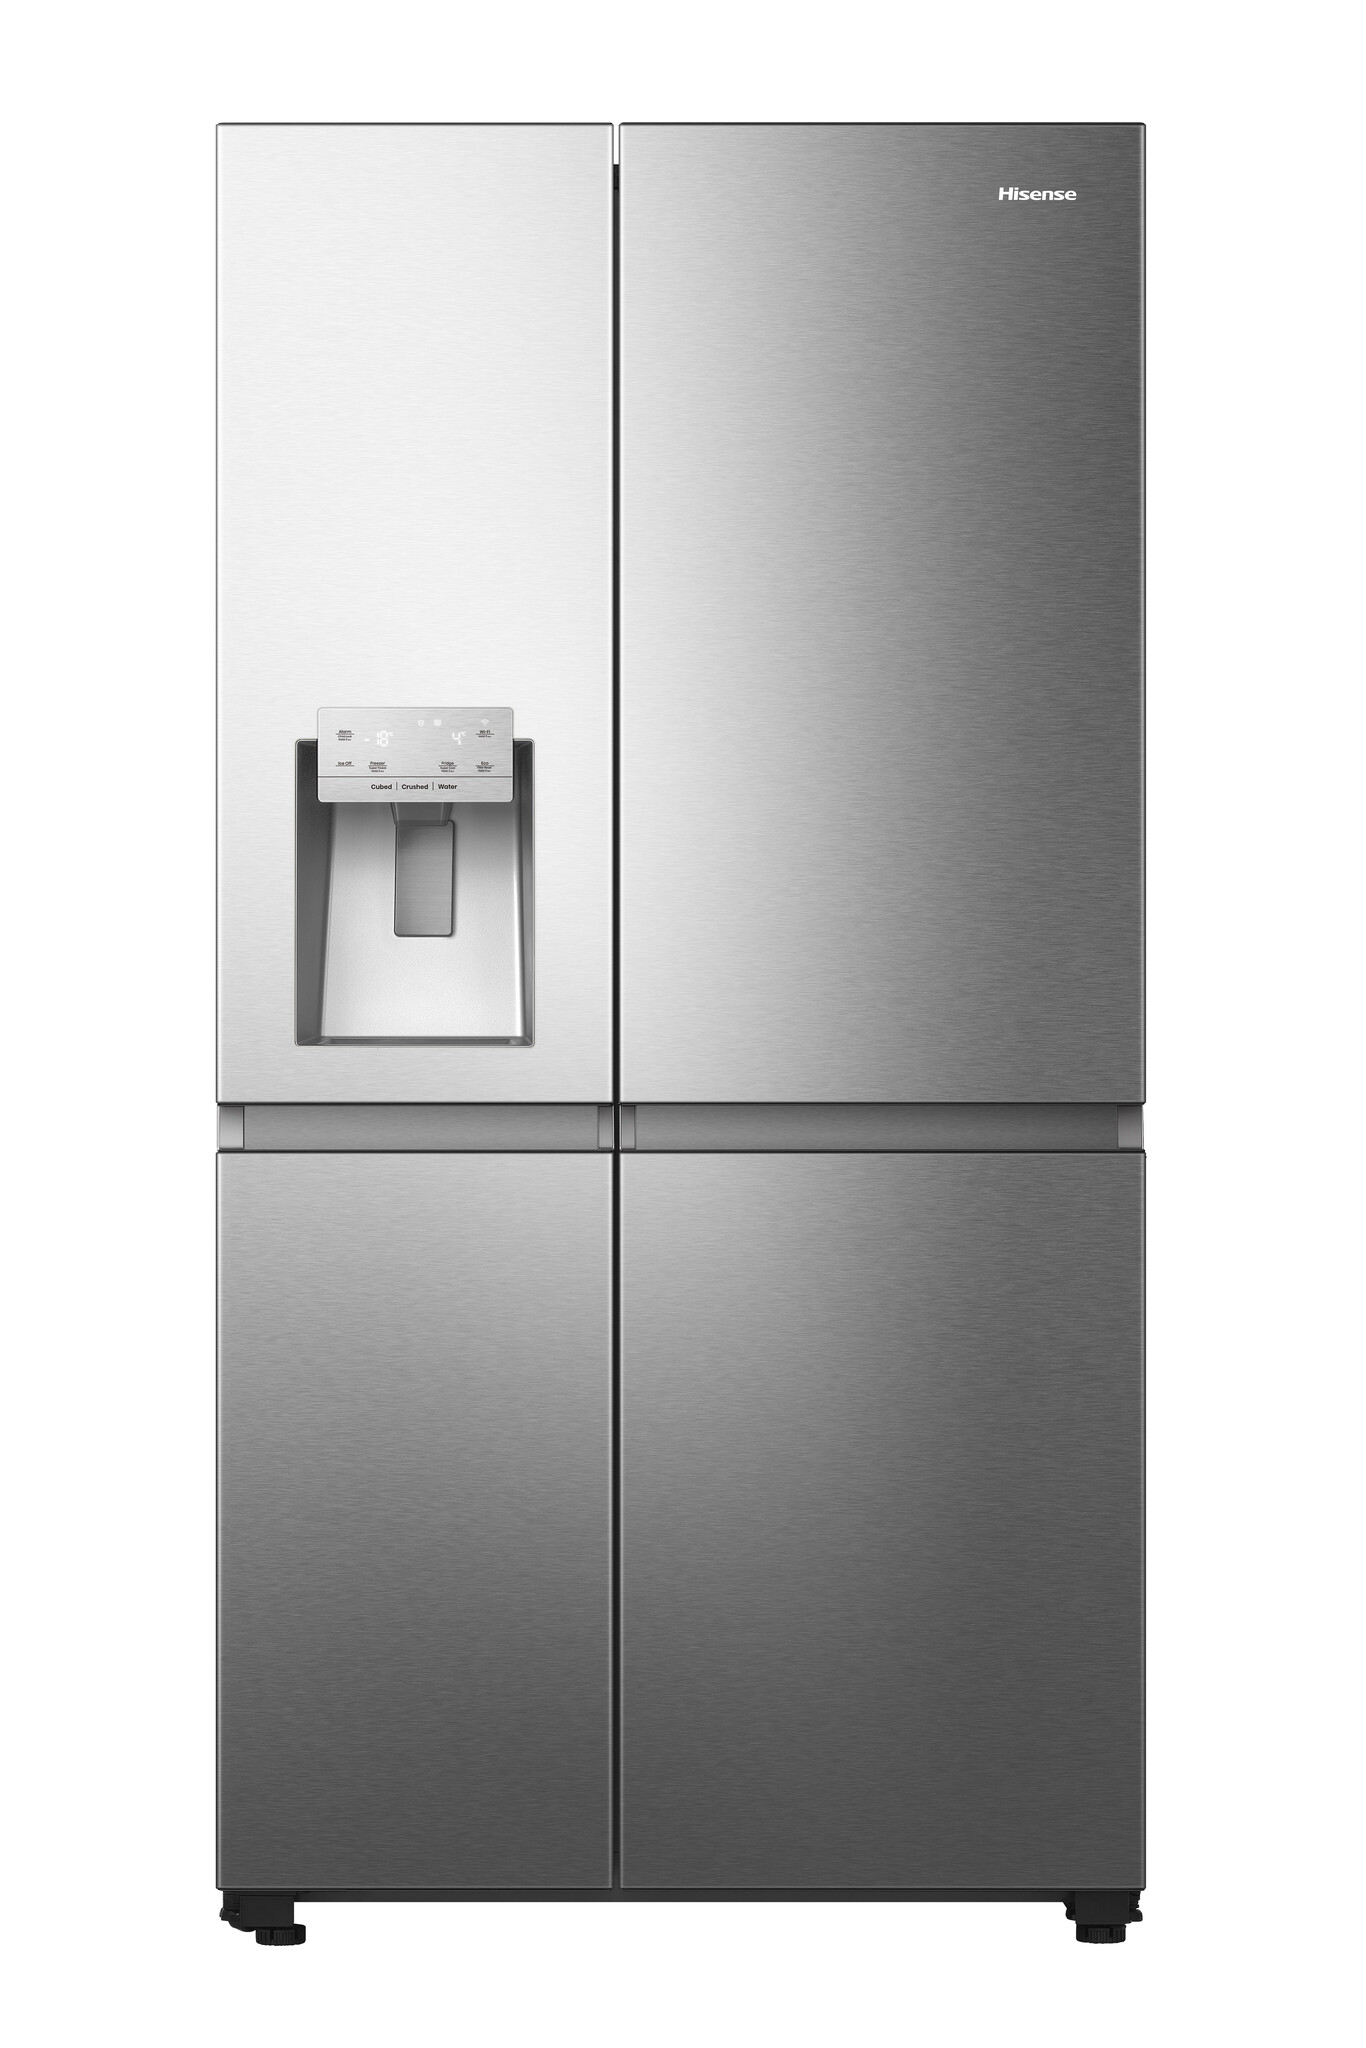 Hisense RS818N4IIE Wifi Connected Plumbed Total No Frost American Fridge Freezer – Stainless Steel – E Rated #365412